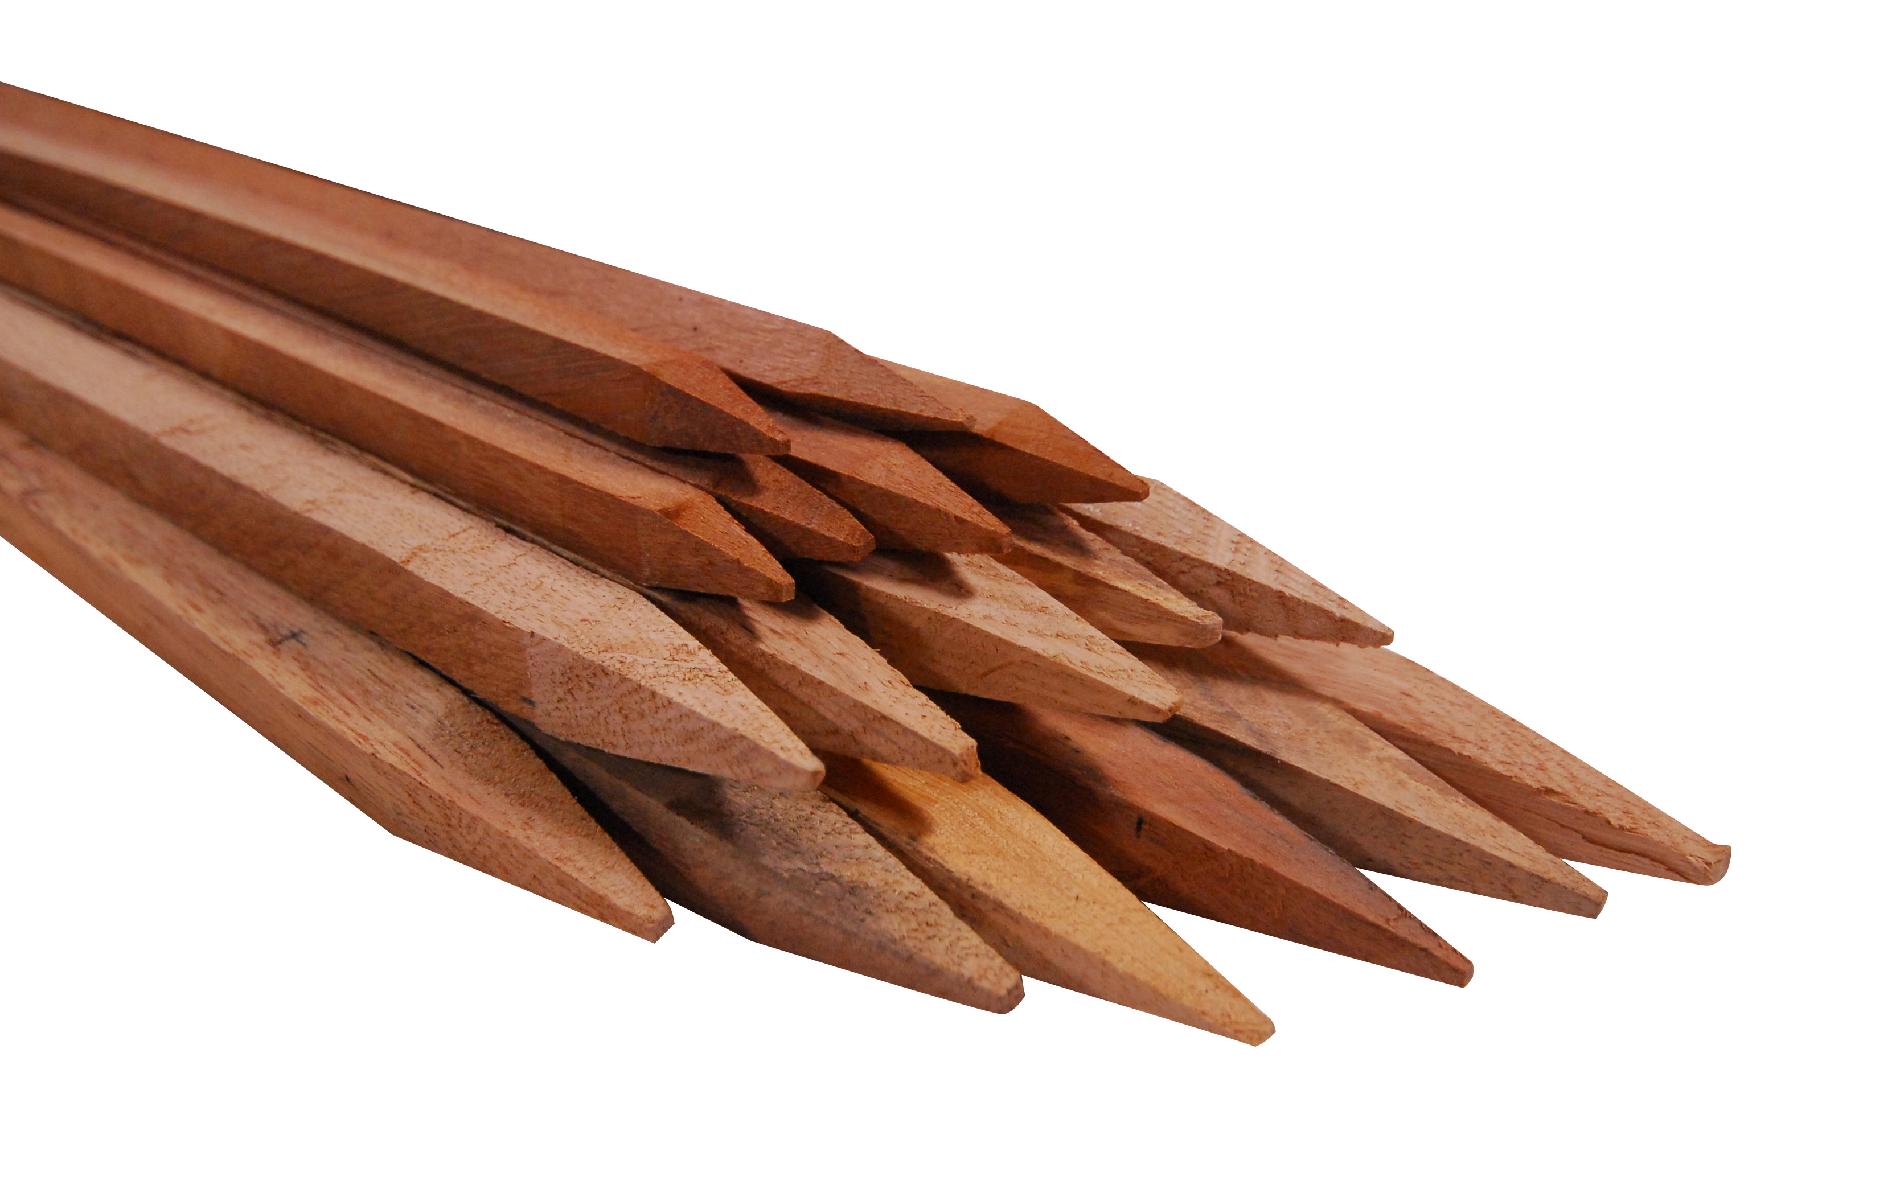 SMG12059 3-ft. Hardwood Stakes - 5-Pack